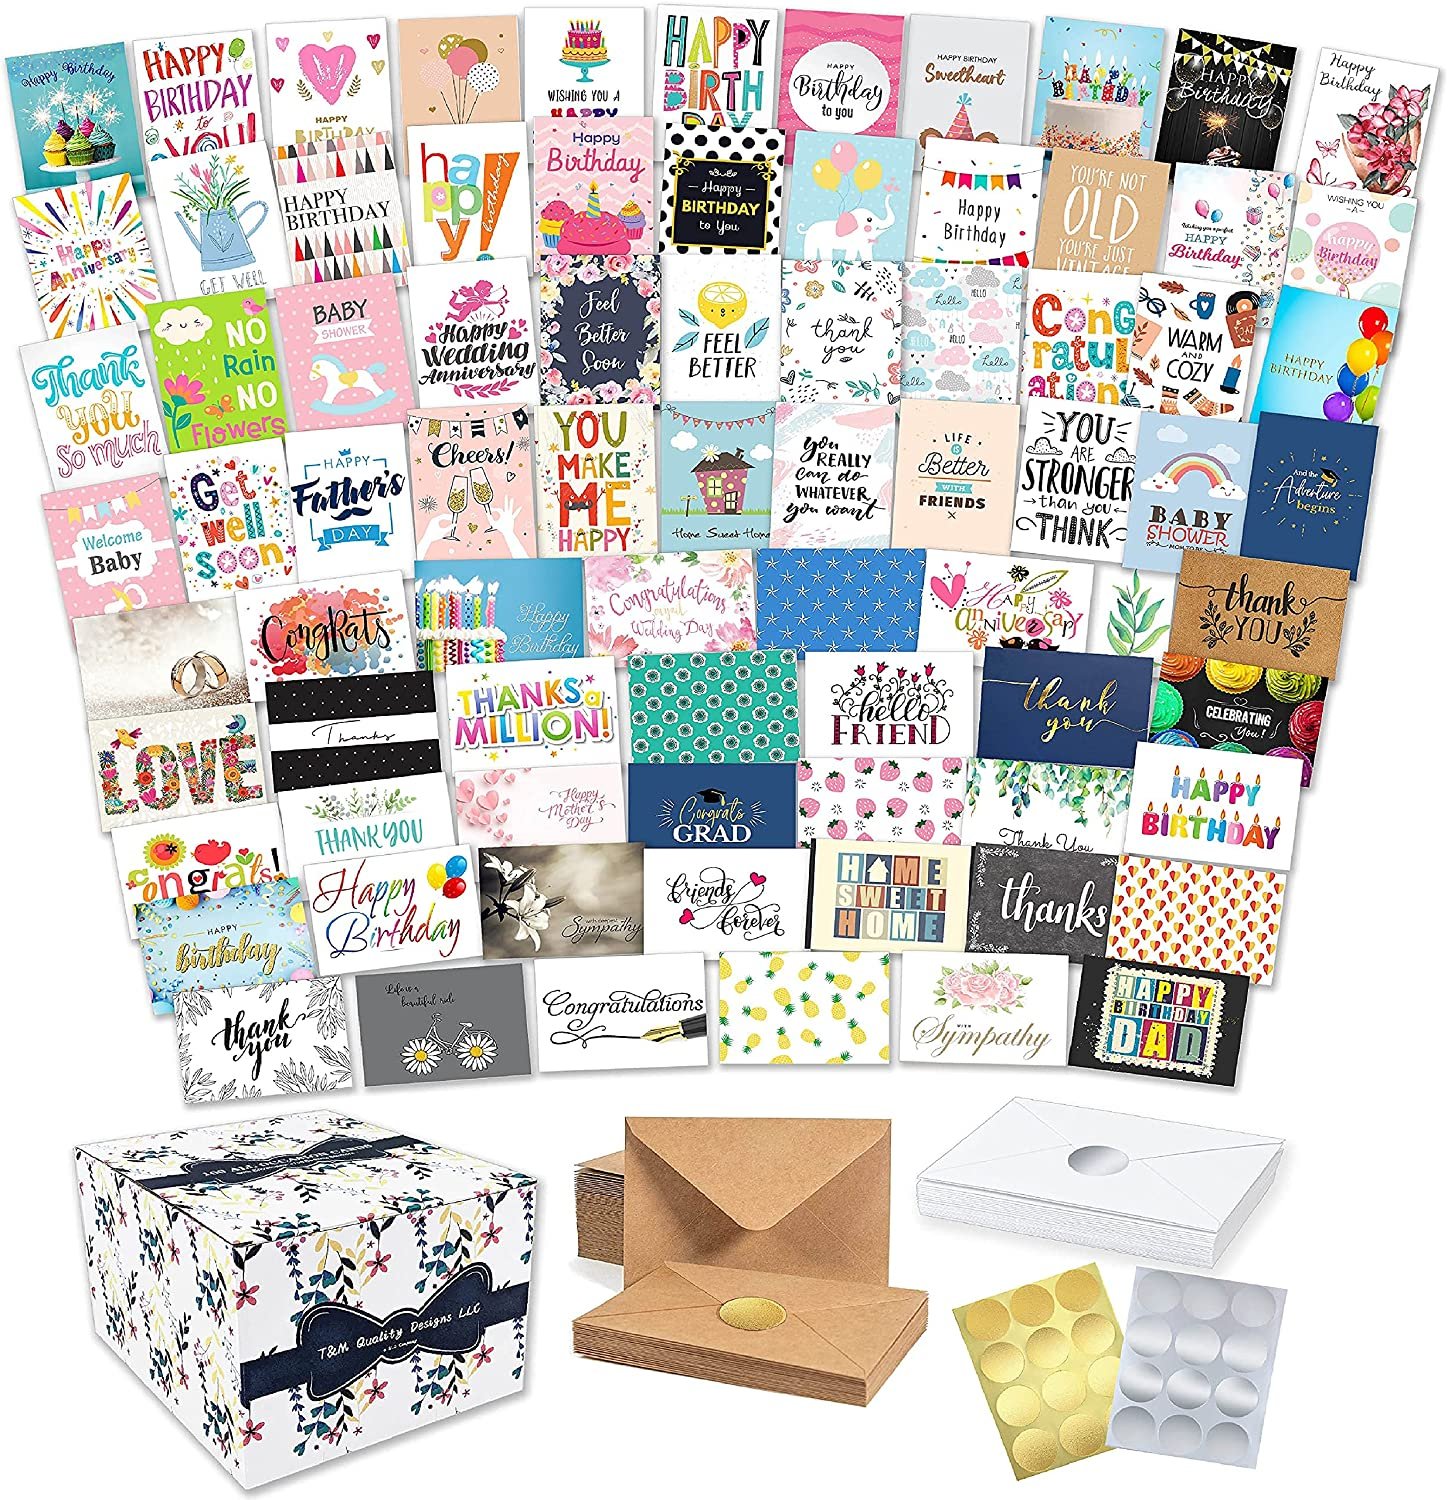 100 All Occasion Cards Assortment Box with Envelopes and Stickers - Large  5x7 Inch Bulk Blank Inside Greeting Notes, 100 Unique Designs in a Sturdy  Card Organizer Box — T&M Quality Designs